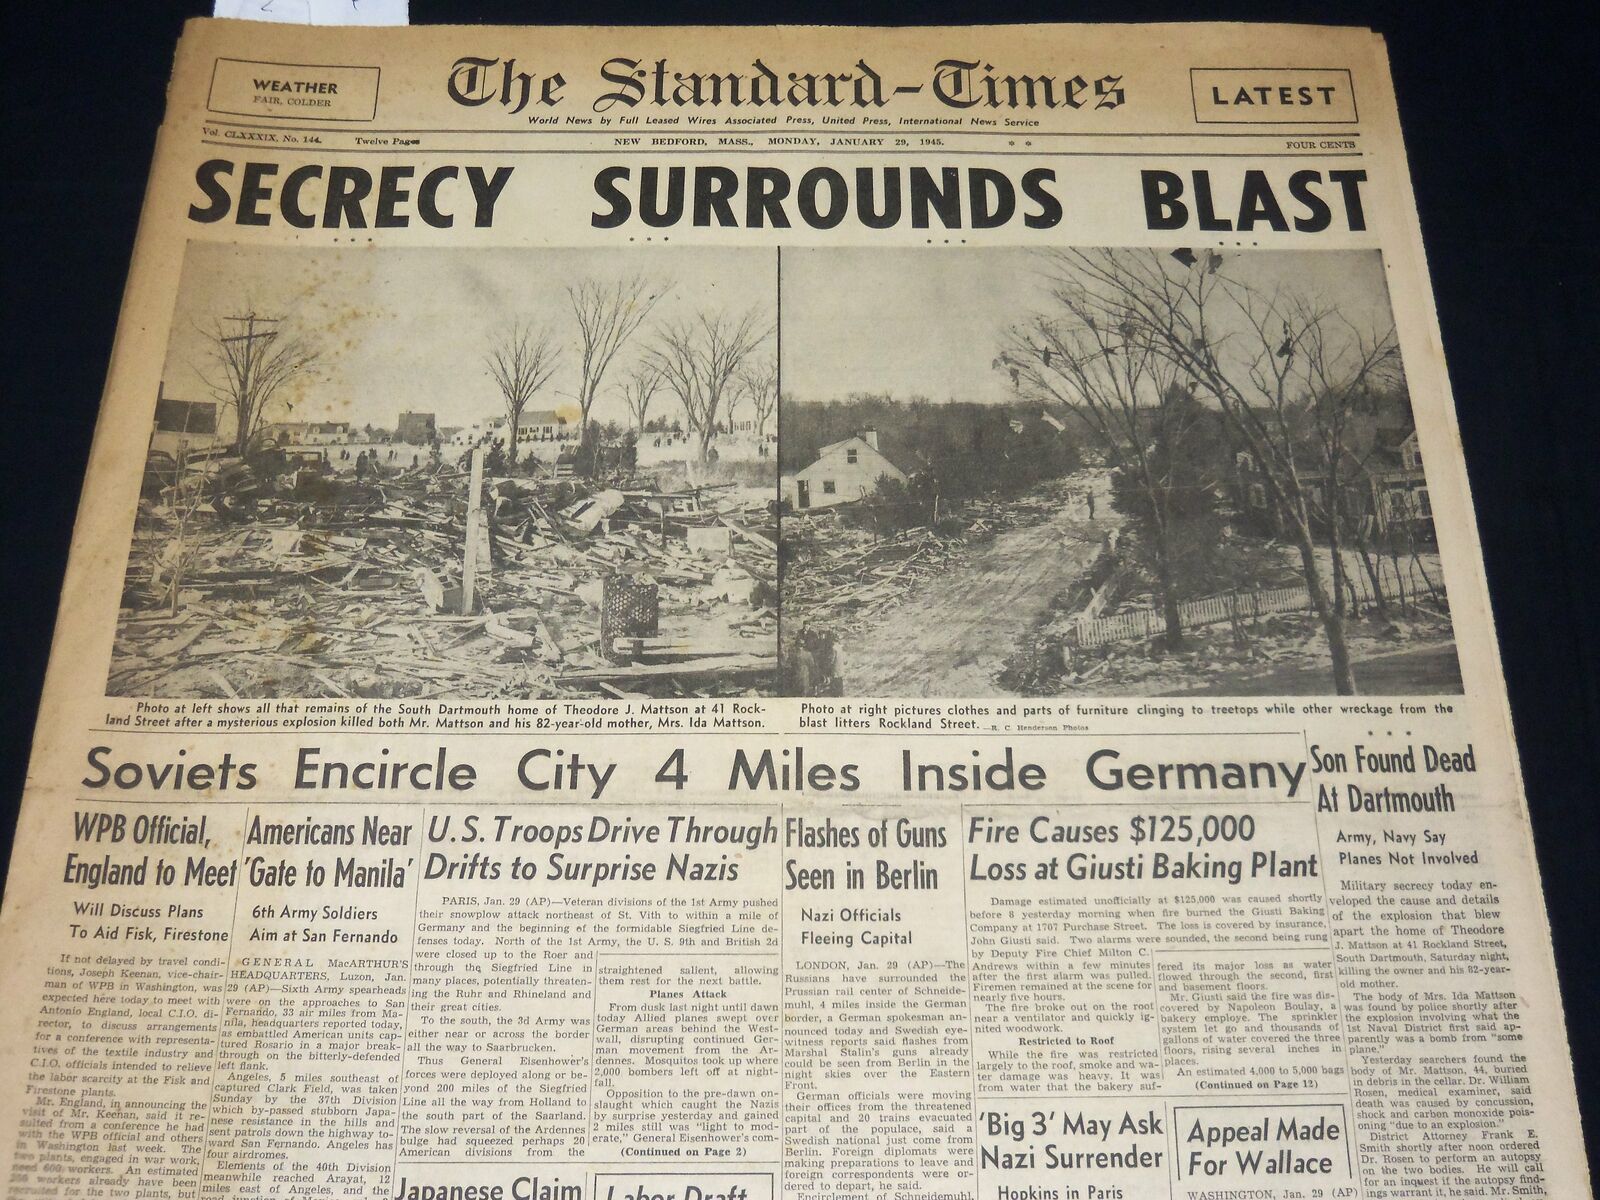 1945 JANUARY 29 NEW BEDFORD STANDARD TIMES - SECRECY SURROUNDS BLAST - NT 8905